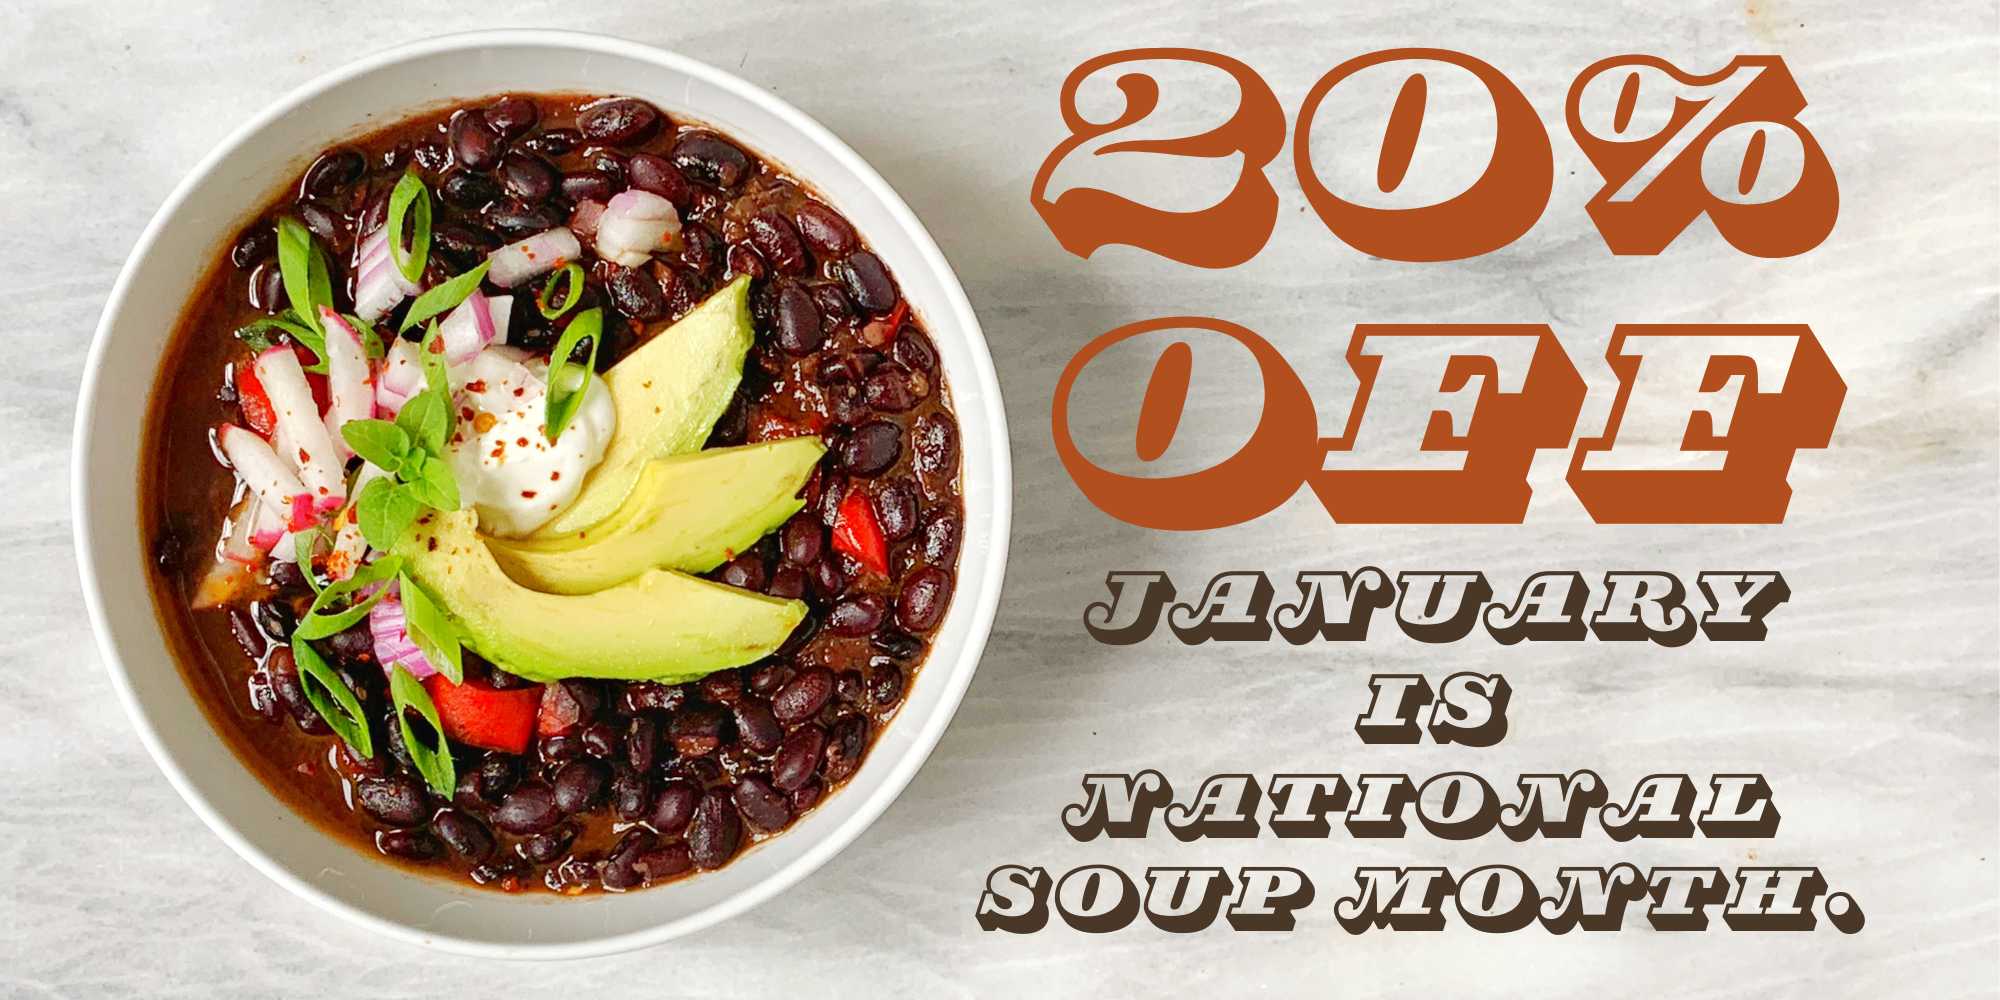 Women's Bean Project soup mixes are 20% off through January for National Soup Month.